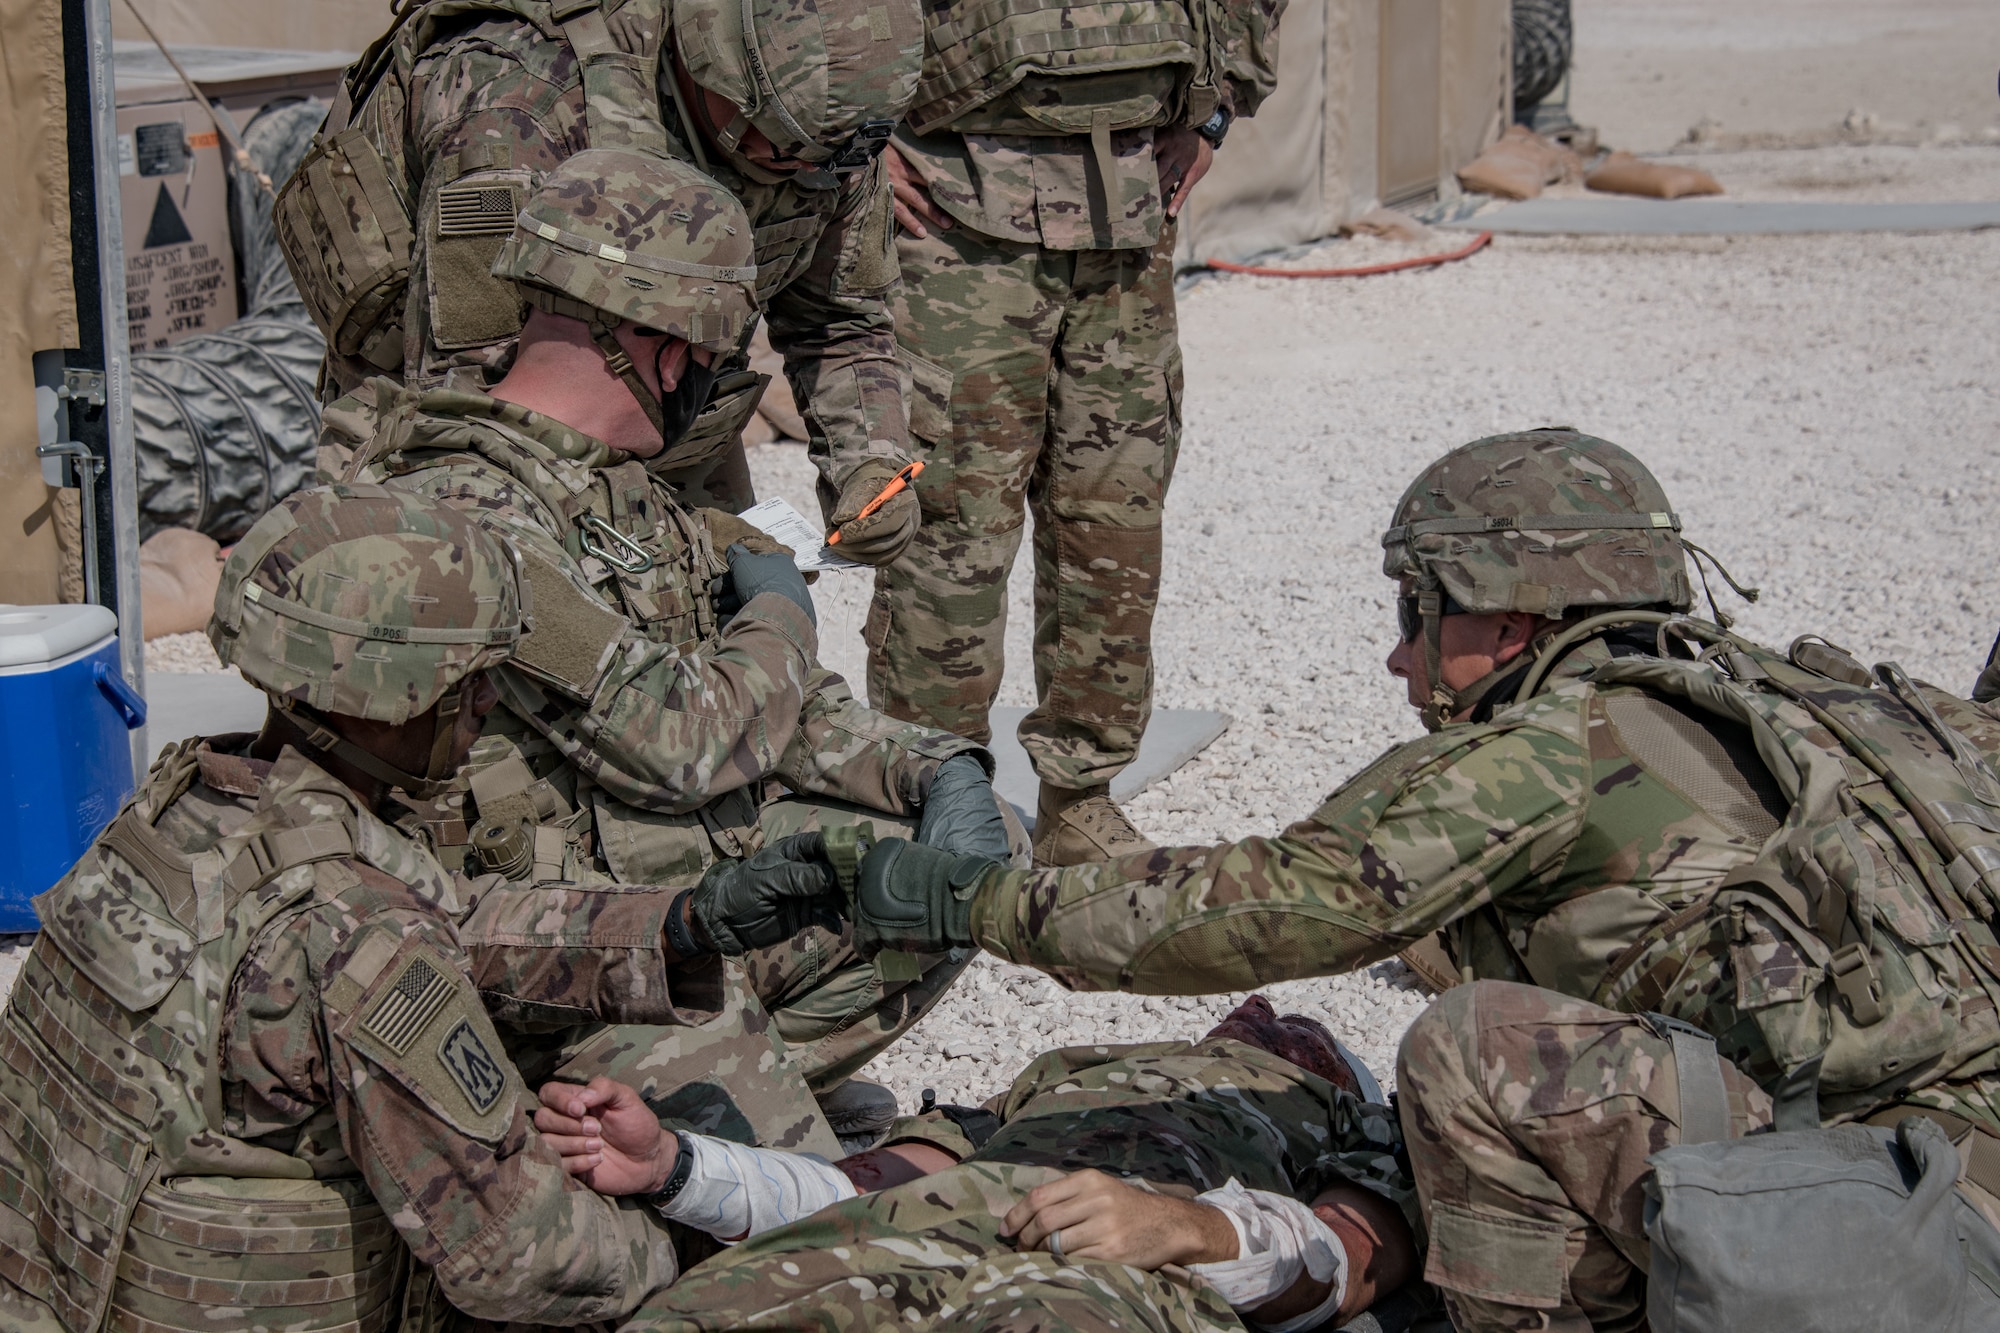 U.S. soldiers wrap gauze around a simulated patient